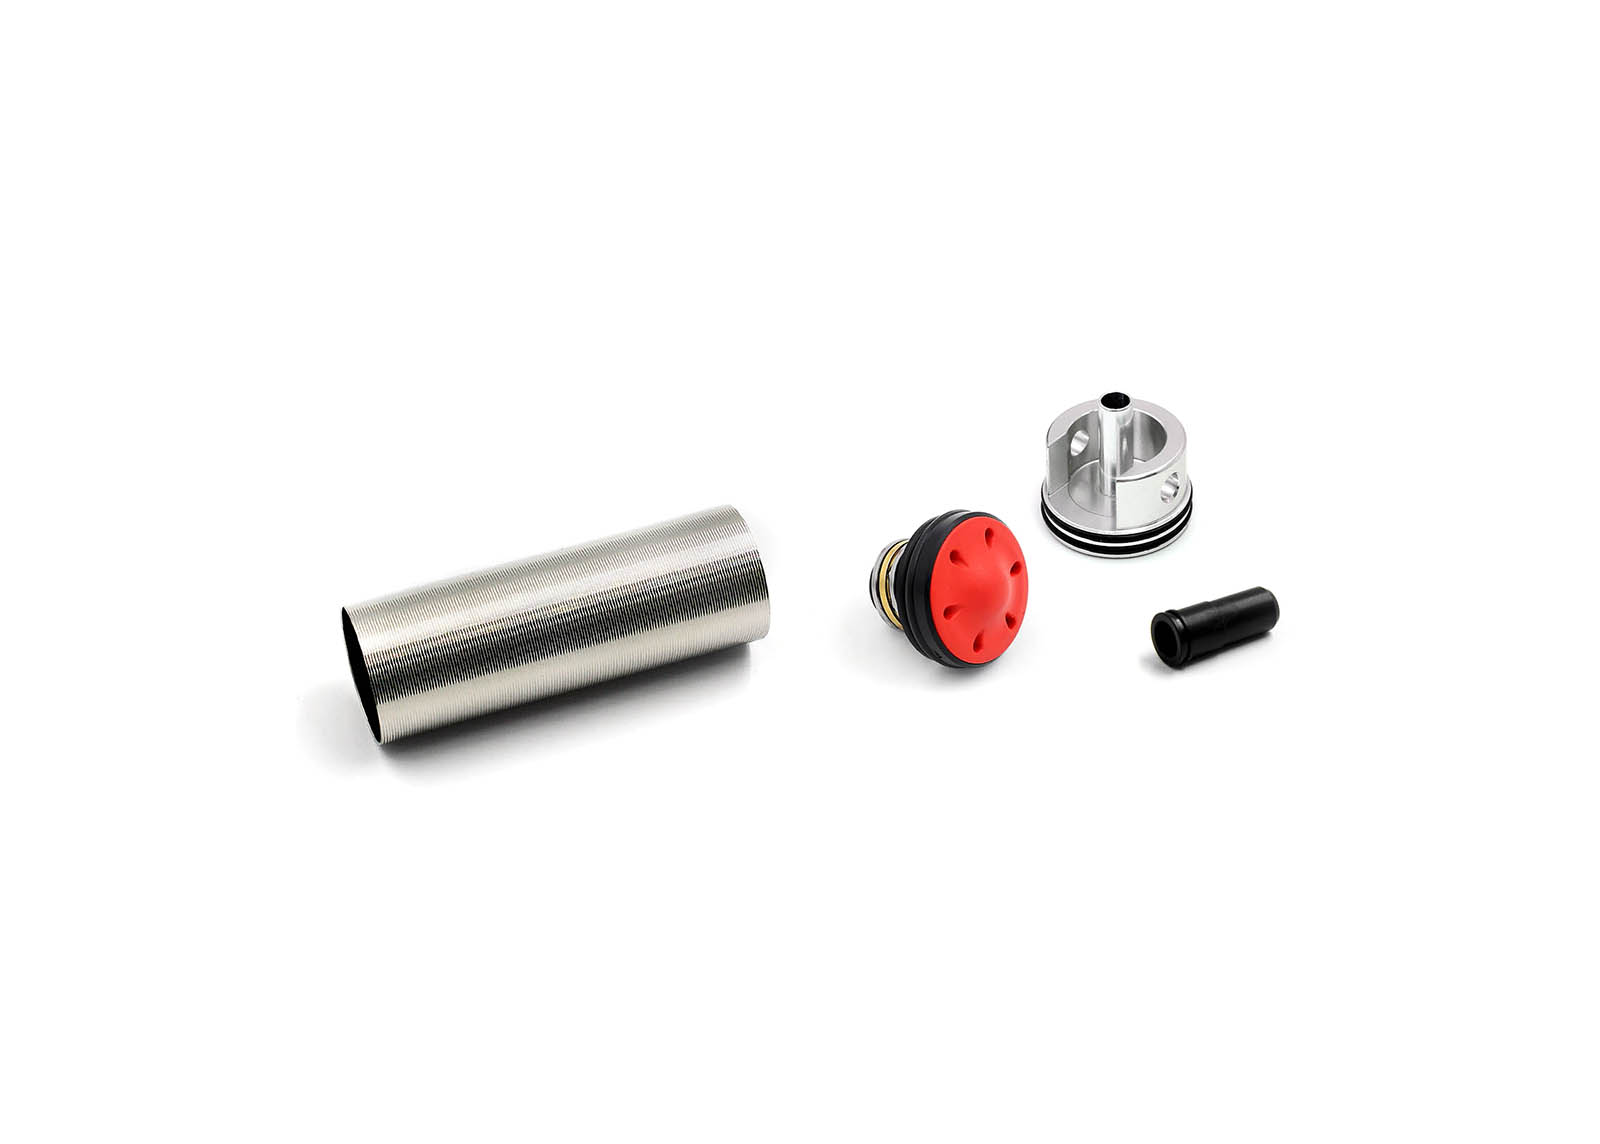 Bore-Up Cylinder Set for AK-47/47S (CA Type) - Modify AEG Airsoft parts